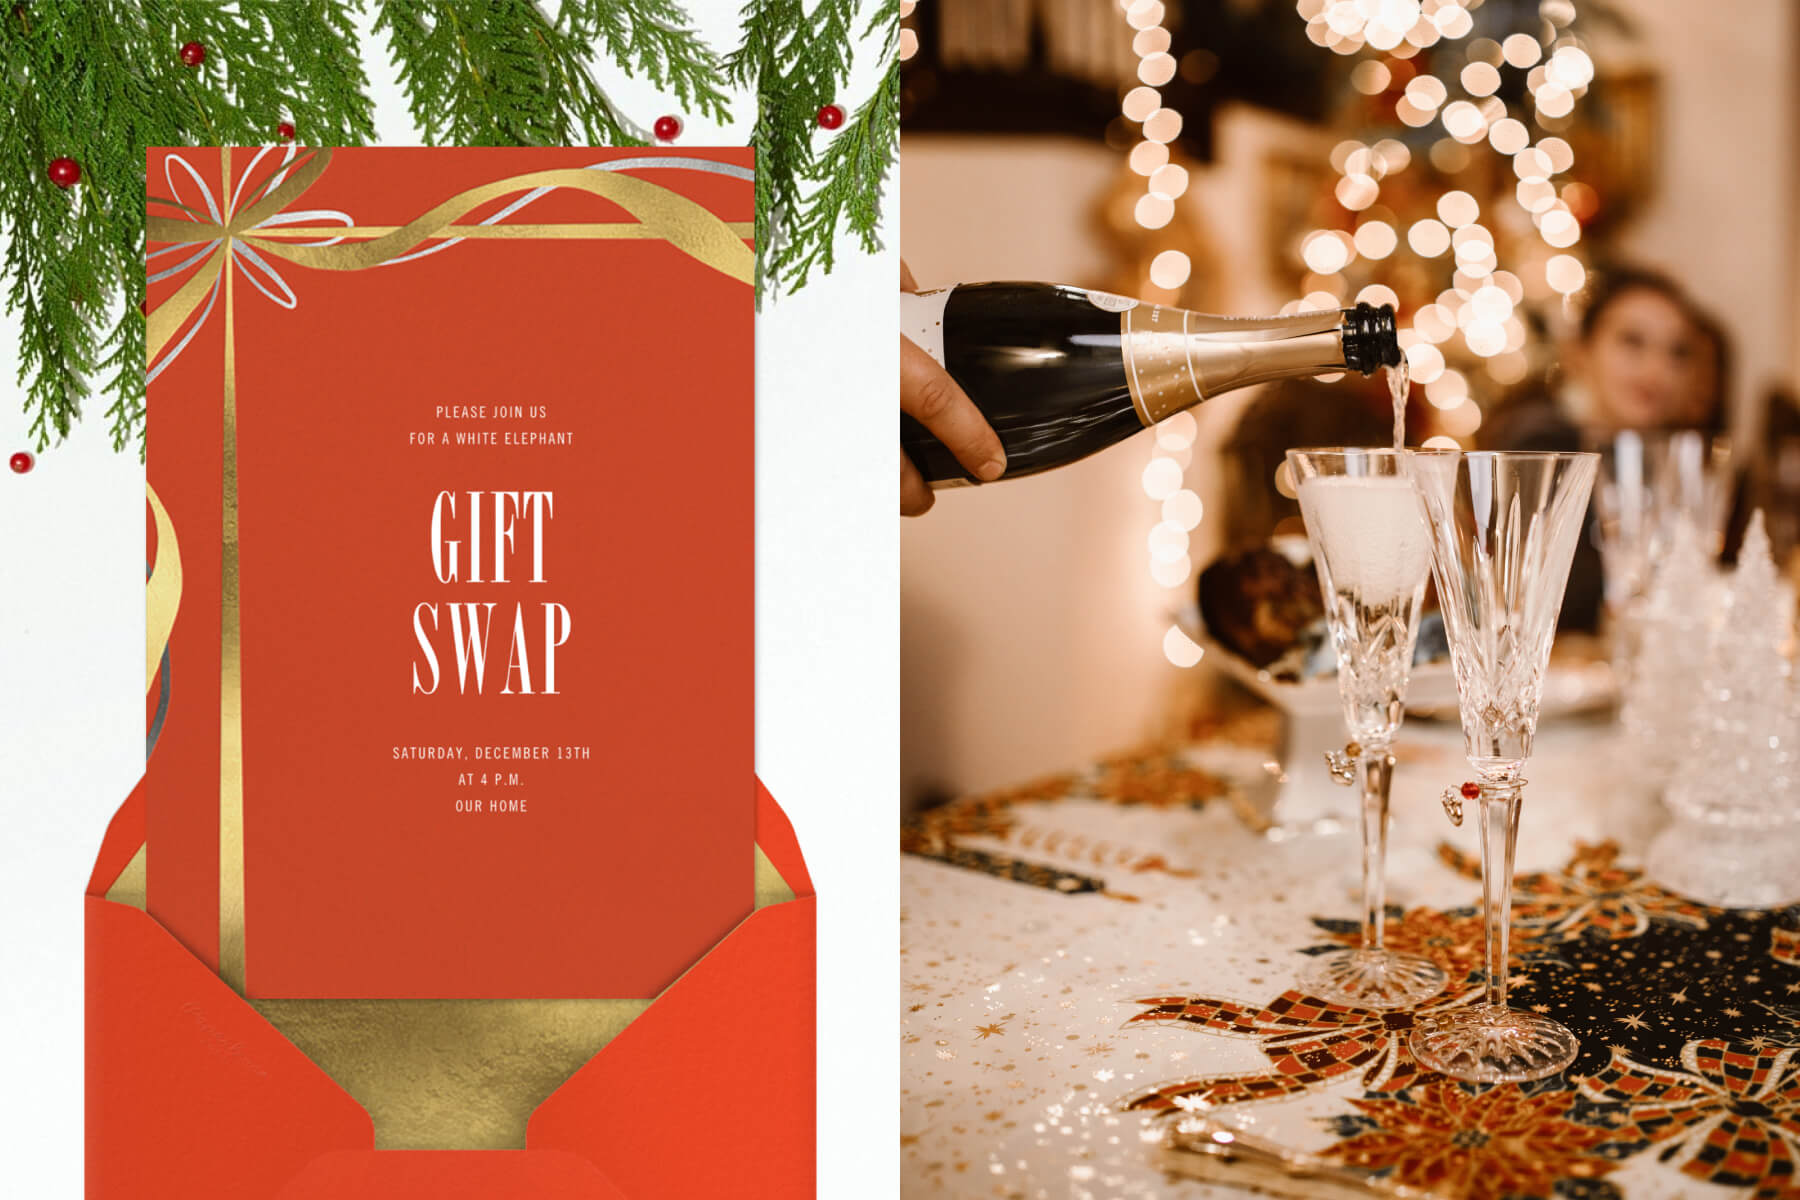 Left: A red invitation with a gold ribbon detail; right: A hand pouring champagne into two glasses sitting on a festive table.